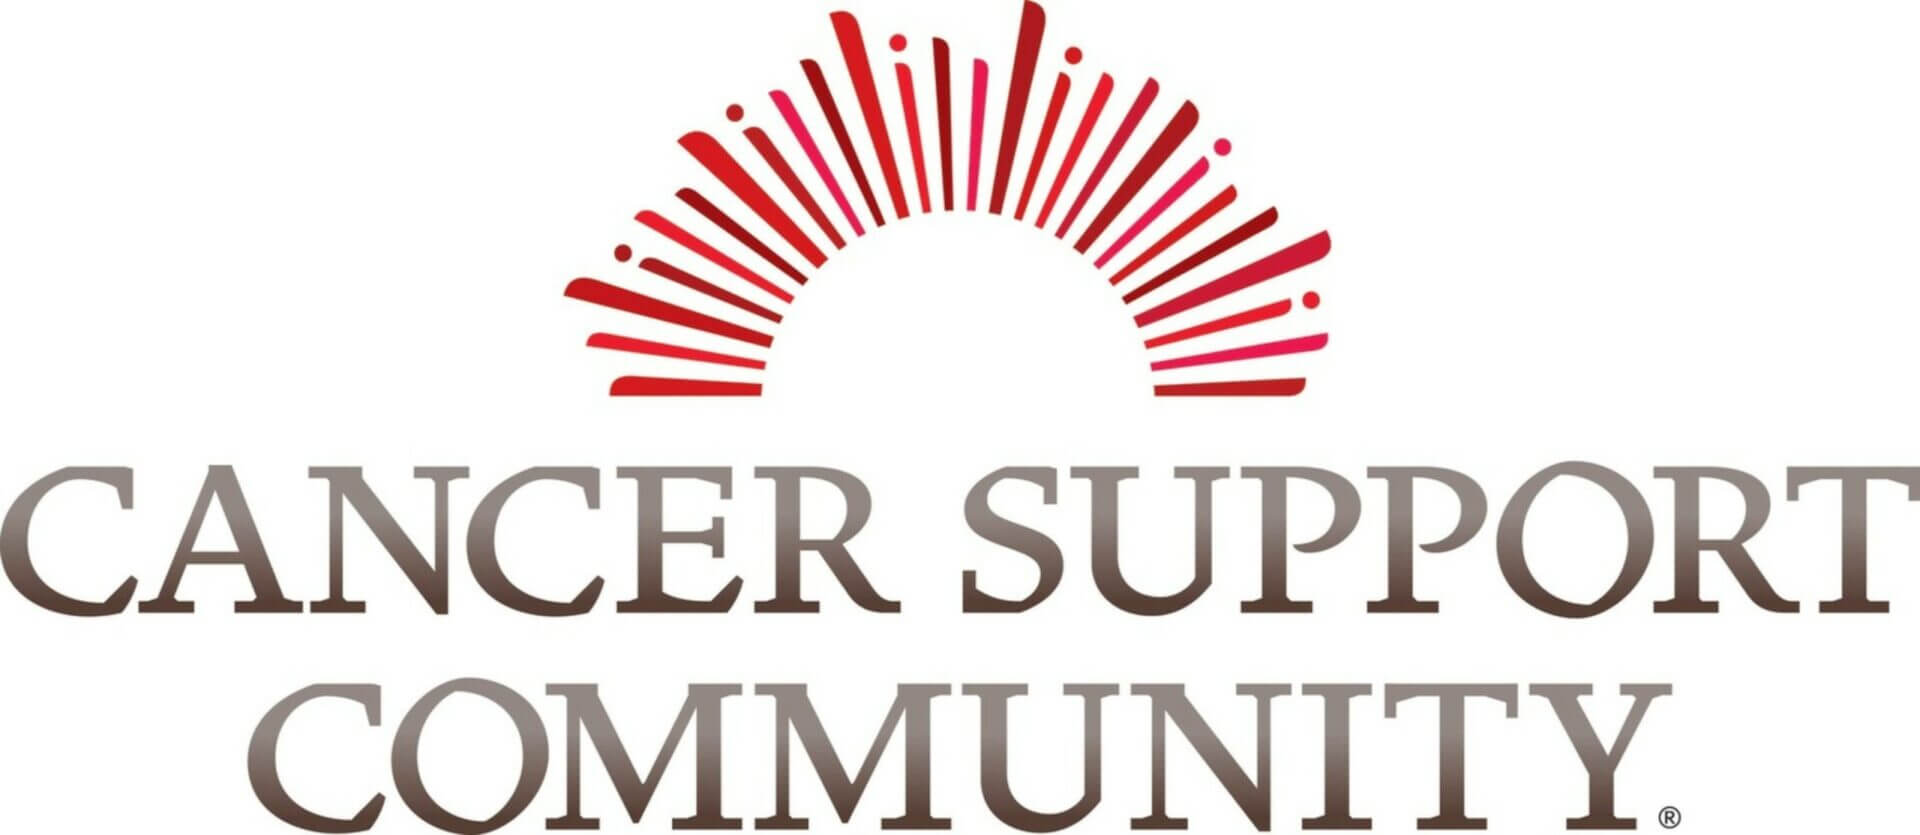 Cancer Support Community (CSC) Logo